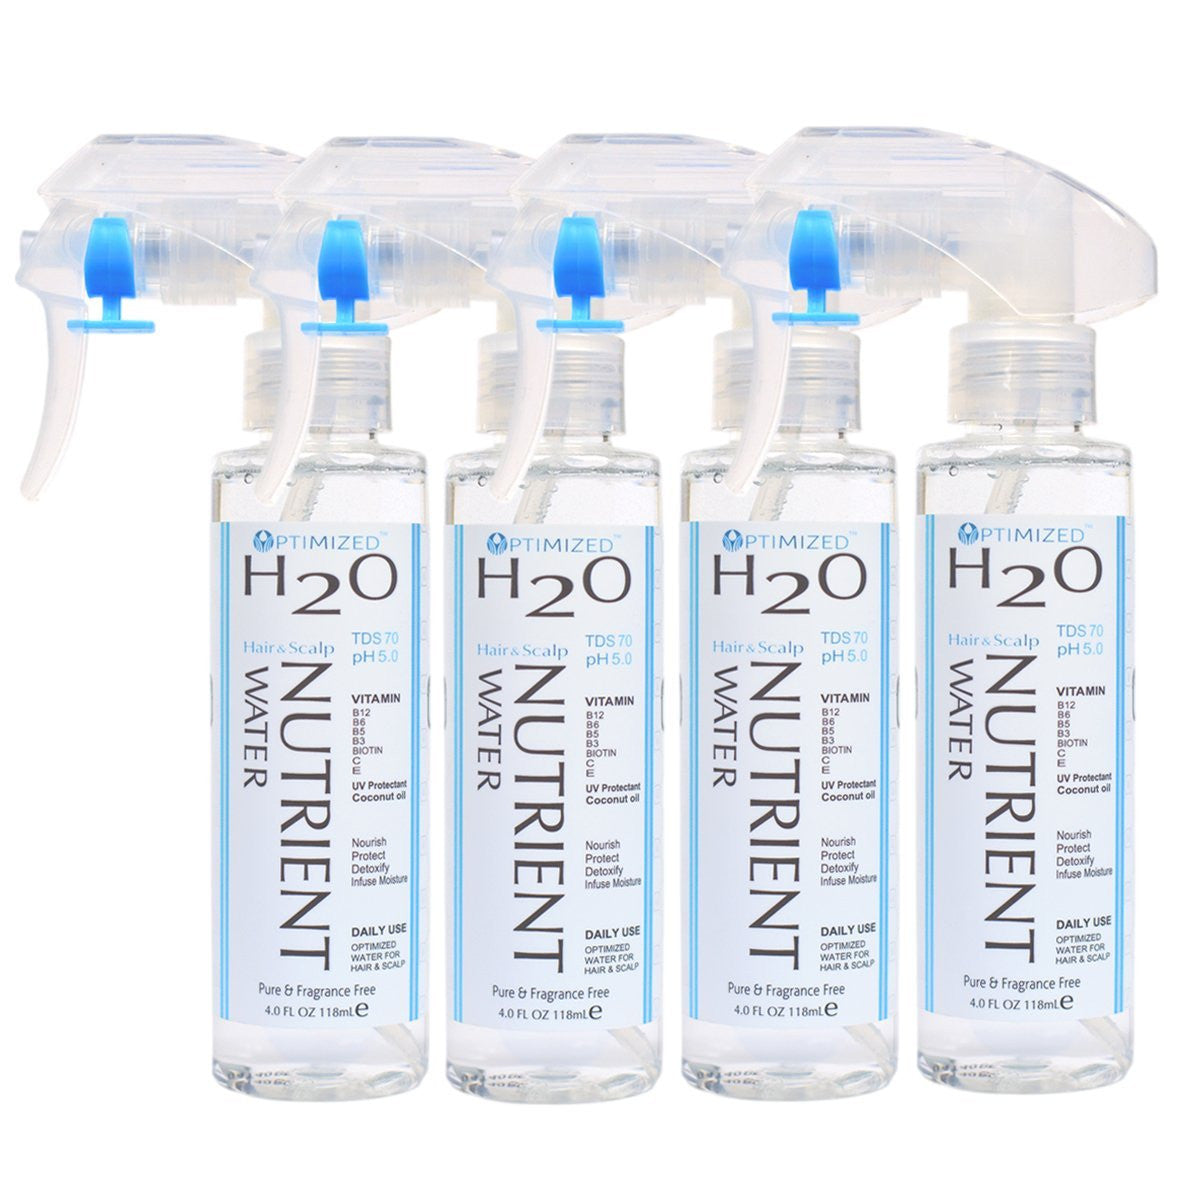 Optimized H2O Daily Super Youth Mist